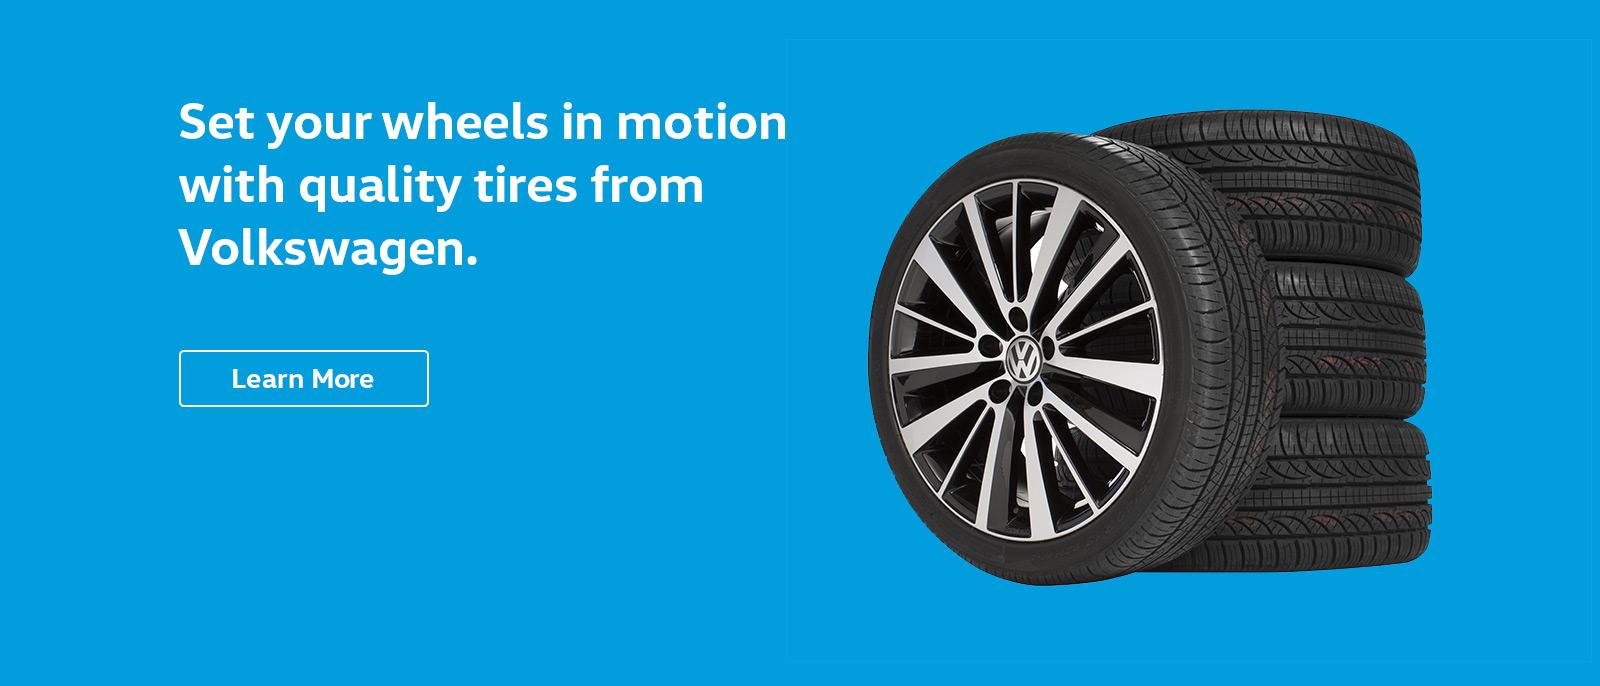 Set your wheels in motion with quality tires from Volkswagen.